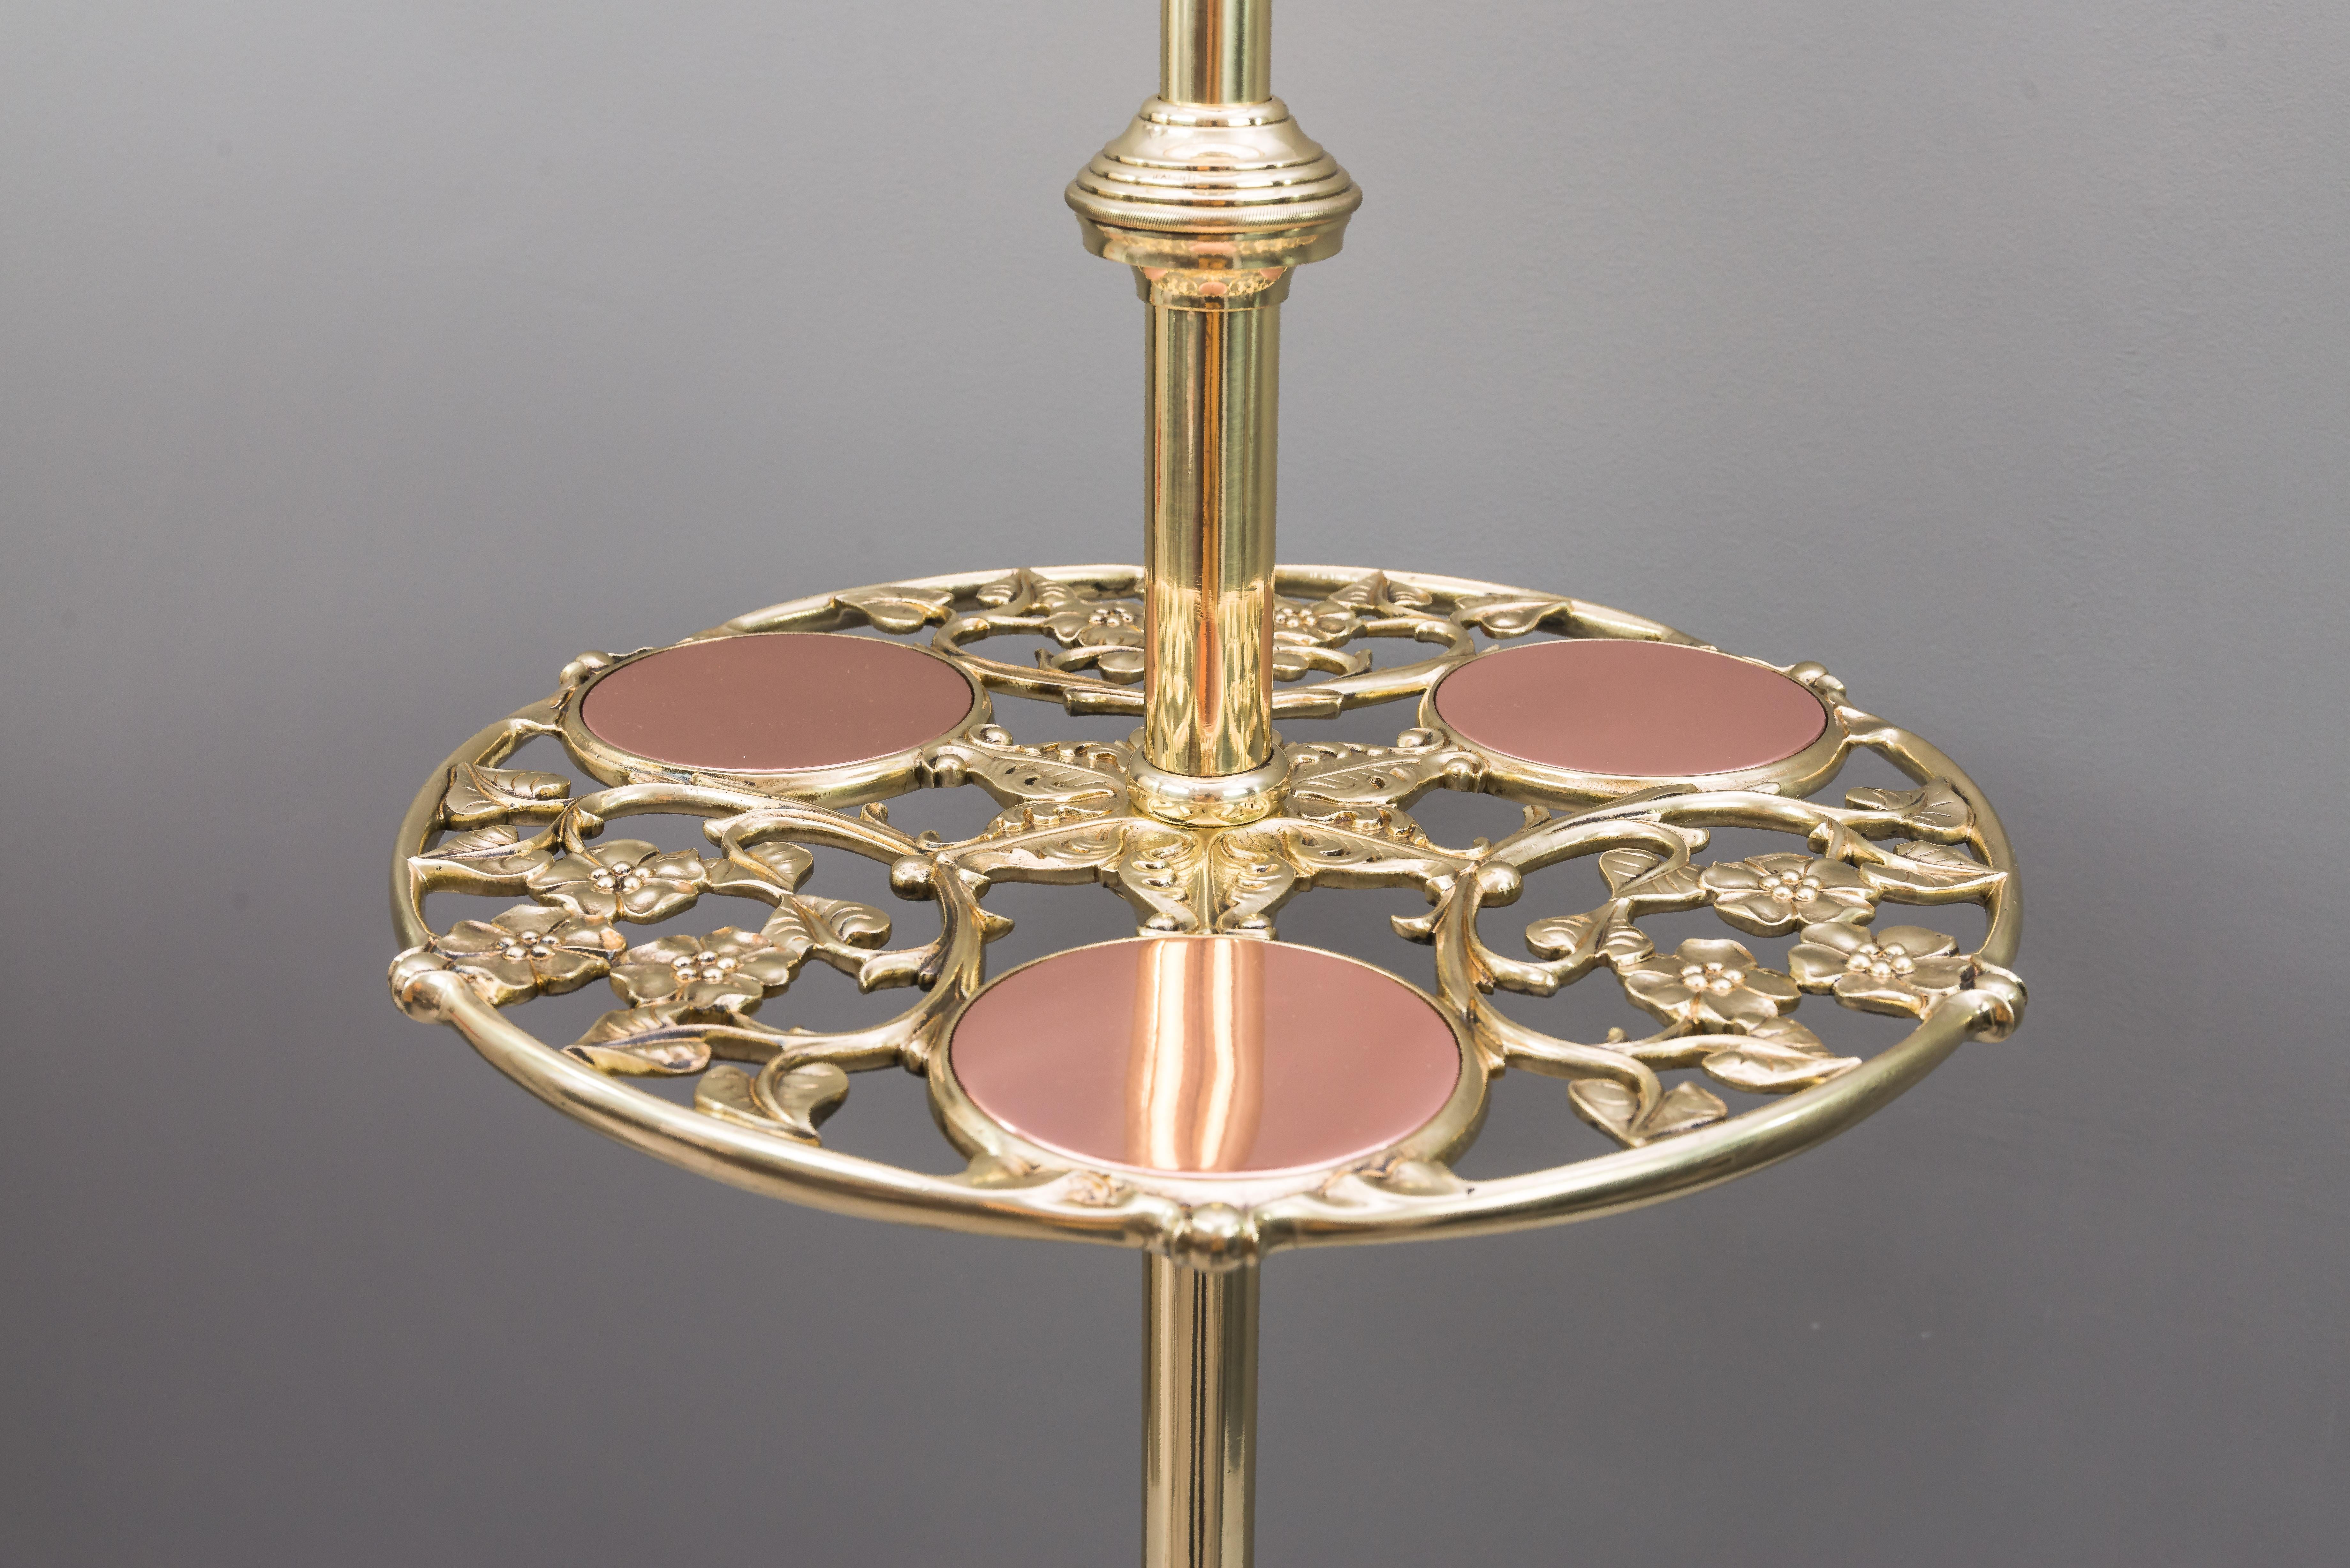 Early 20th Century Adjustable Jugendstil Floor Lamp with Original Antique Glass Shade, circa 1908